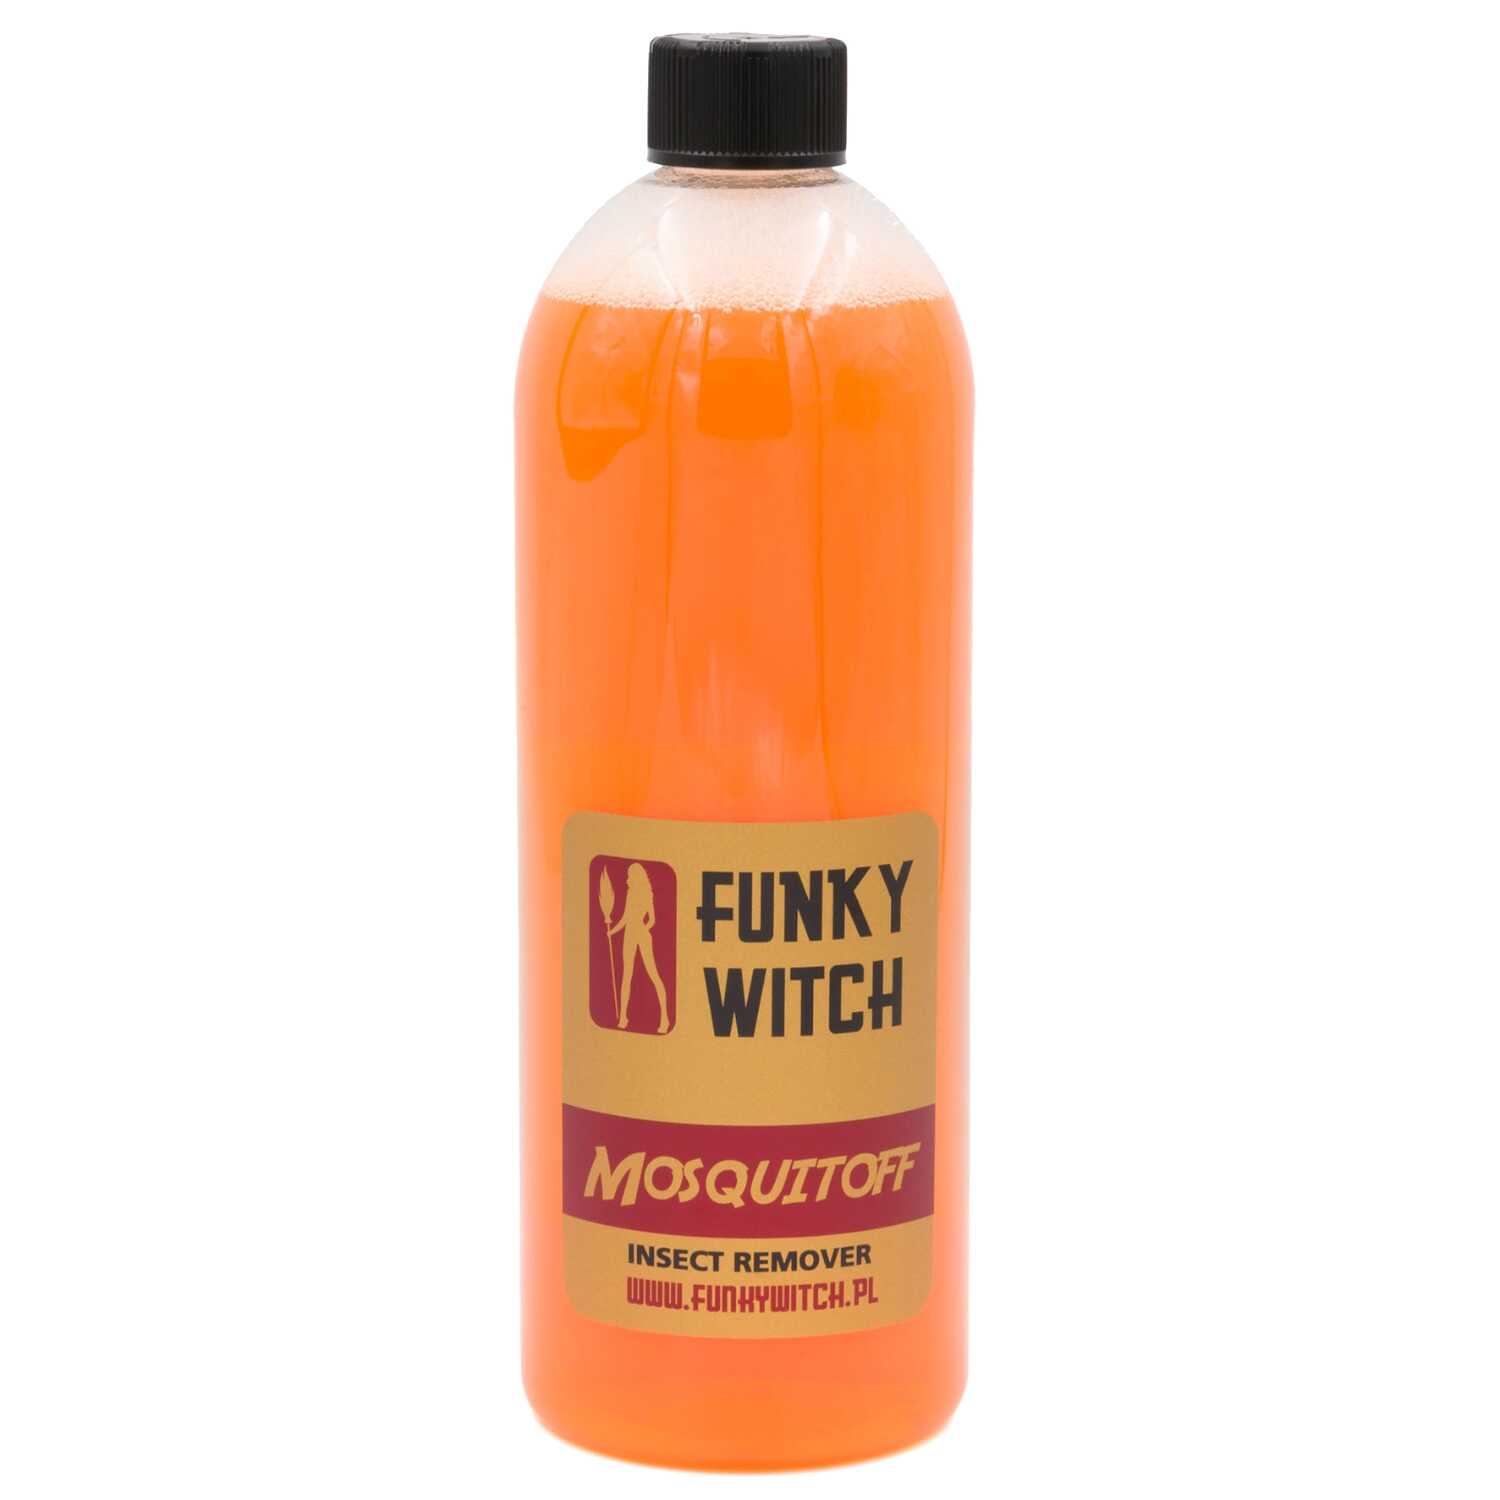 Funky Witch Mosquitoff Insect Remover - Produkt do usuwania owadów 1L